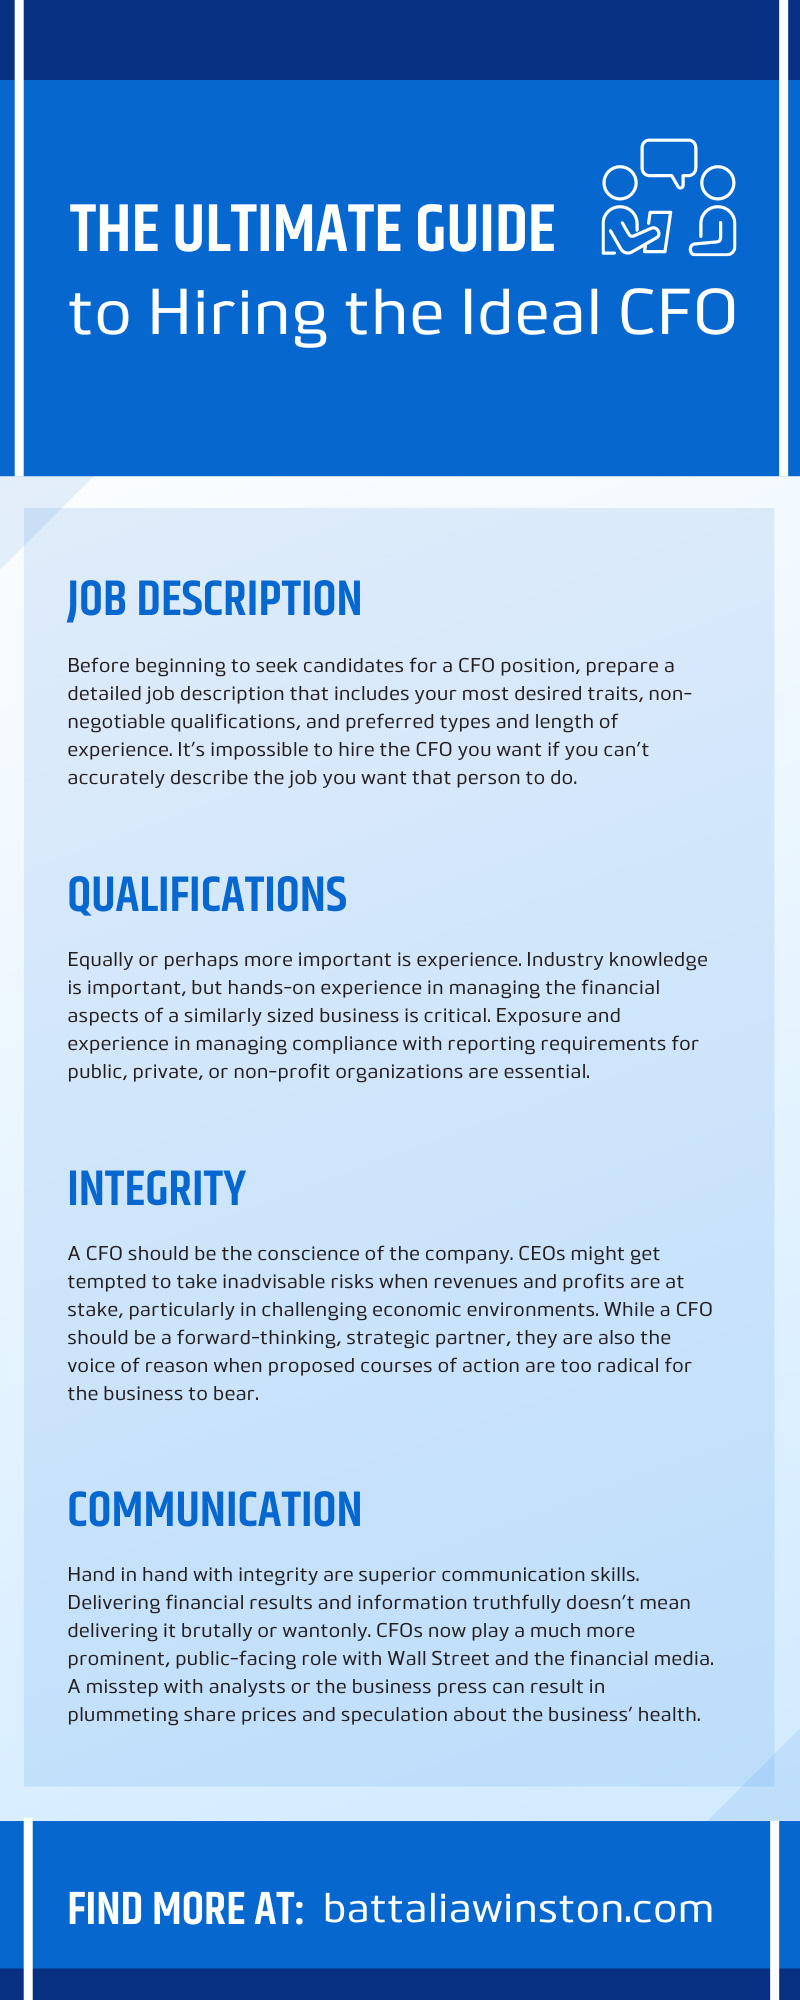 The Ultimate Guide to Hiring the Ideal CFO